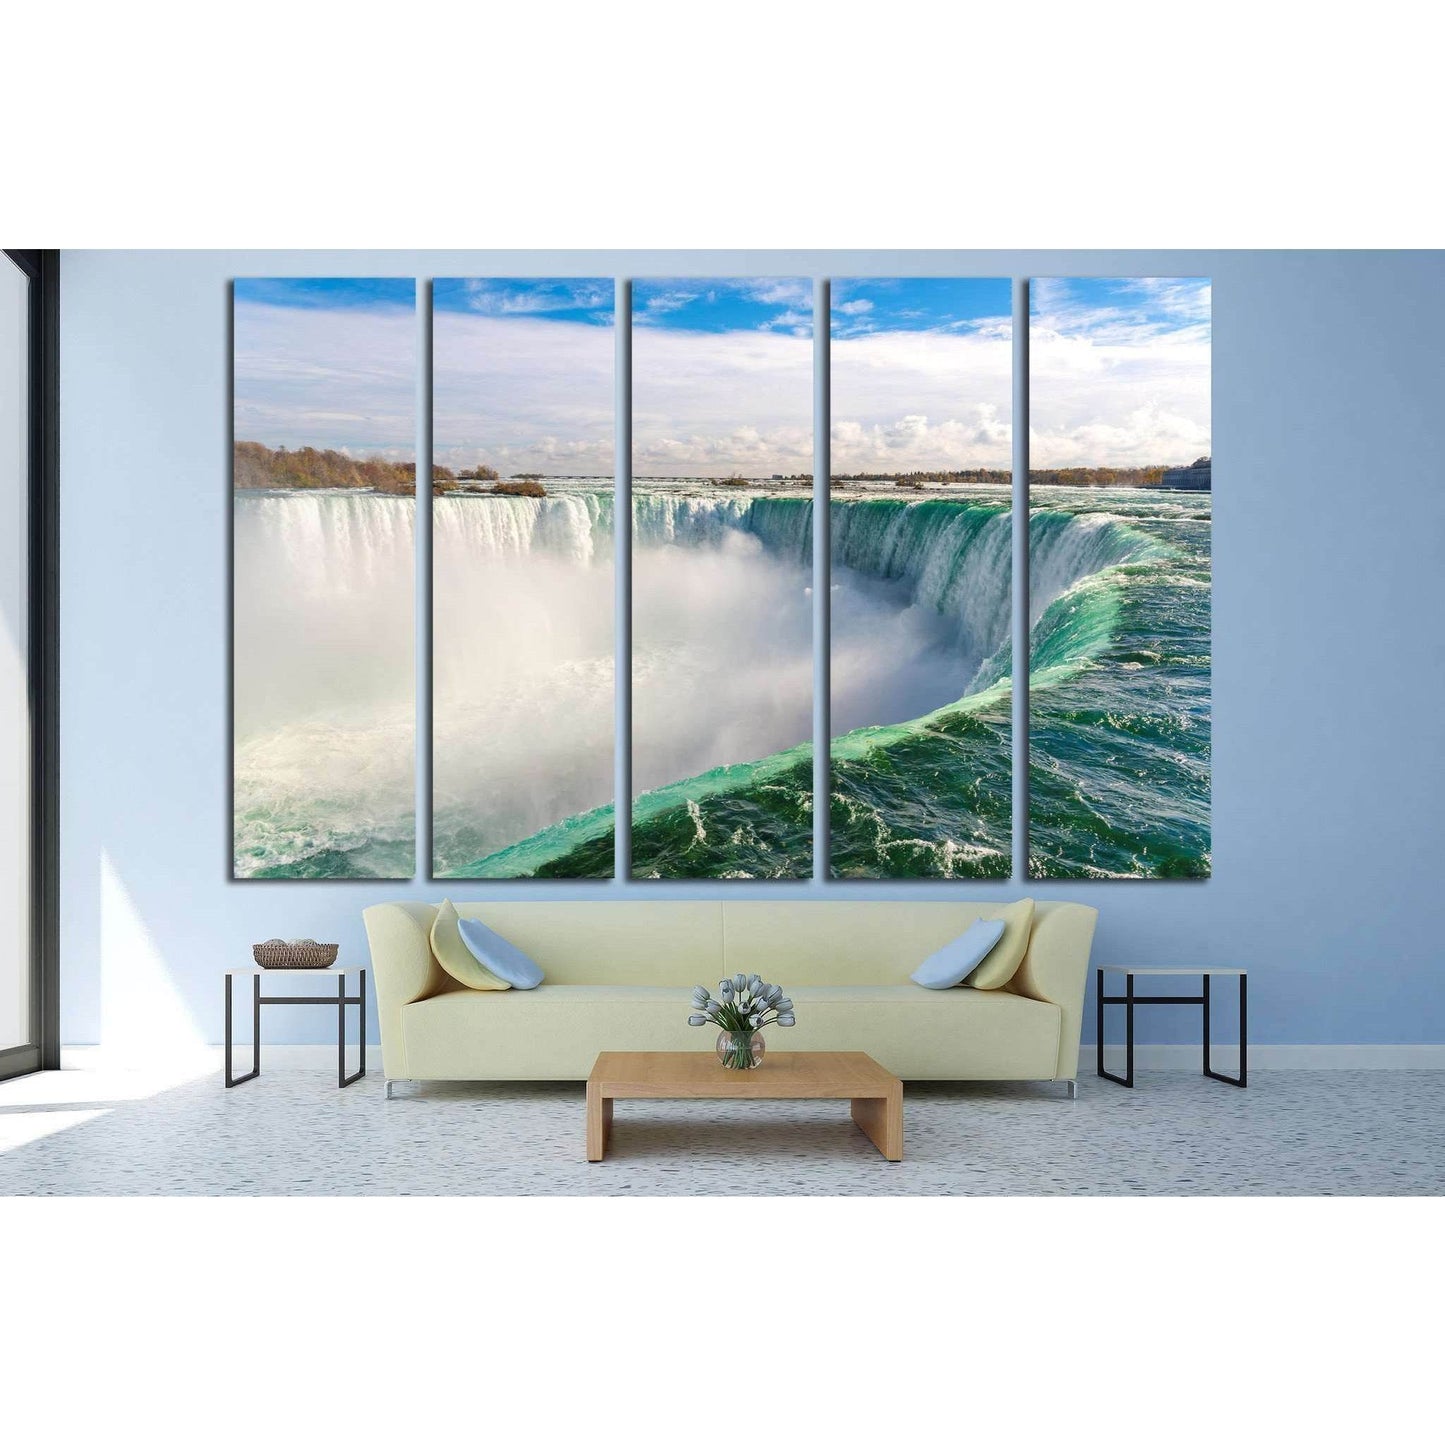 Niagara Falls Wall Art, Horseshoe Fall Canvas Print, Ontario, Canada Ready to Hang Canvas Print №2008This canvas print presents a powerful and close-up view of Niagara Falls, capturing the thunderous motion of the water and the mist that rises above. The